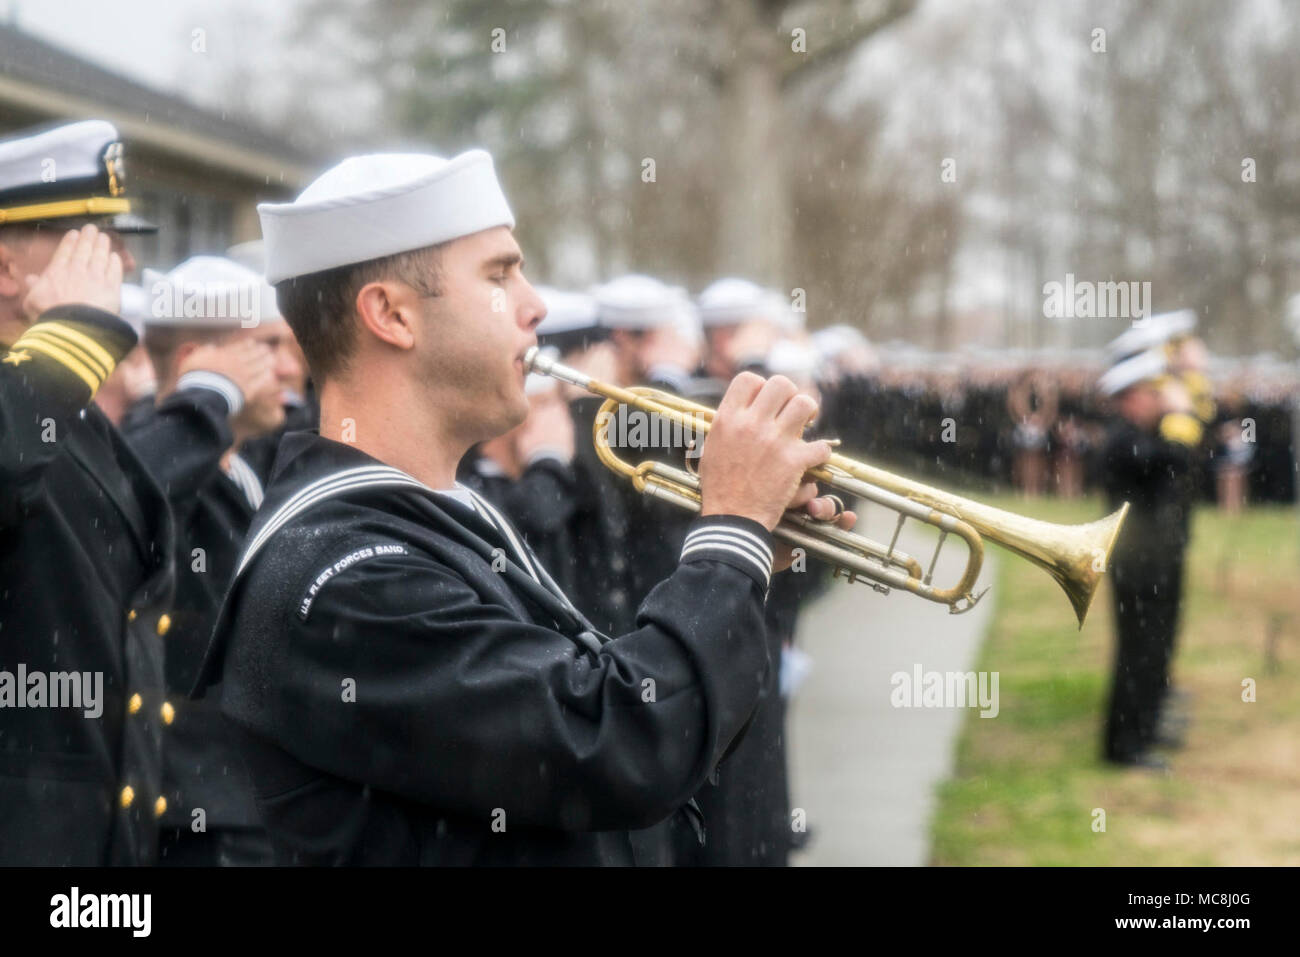 VIRGINIA BEACH, Va. (March 30, 2018) A Sailor assigned to the U.S. Fleet Forces band plays Taps as friends, family and squadron mates from the 'Blacklions' of Strike Fighter Squadron (VFA) 213 and Helicopter Sea Combat Squadron (HSC) 26 attend a memorial service for Lt. Cmdr. James Brice Johnson and Lt. Caleb King. Johnson and King lost their lives in an F/A-18F Super Hornet mishap that occured just outside Naval Air Station Key West on March 14, 2018. Stock Photo